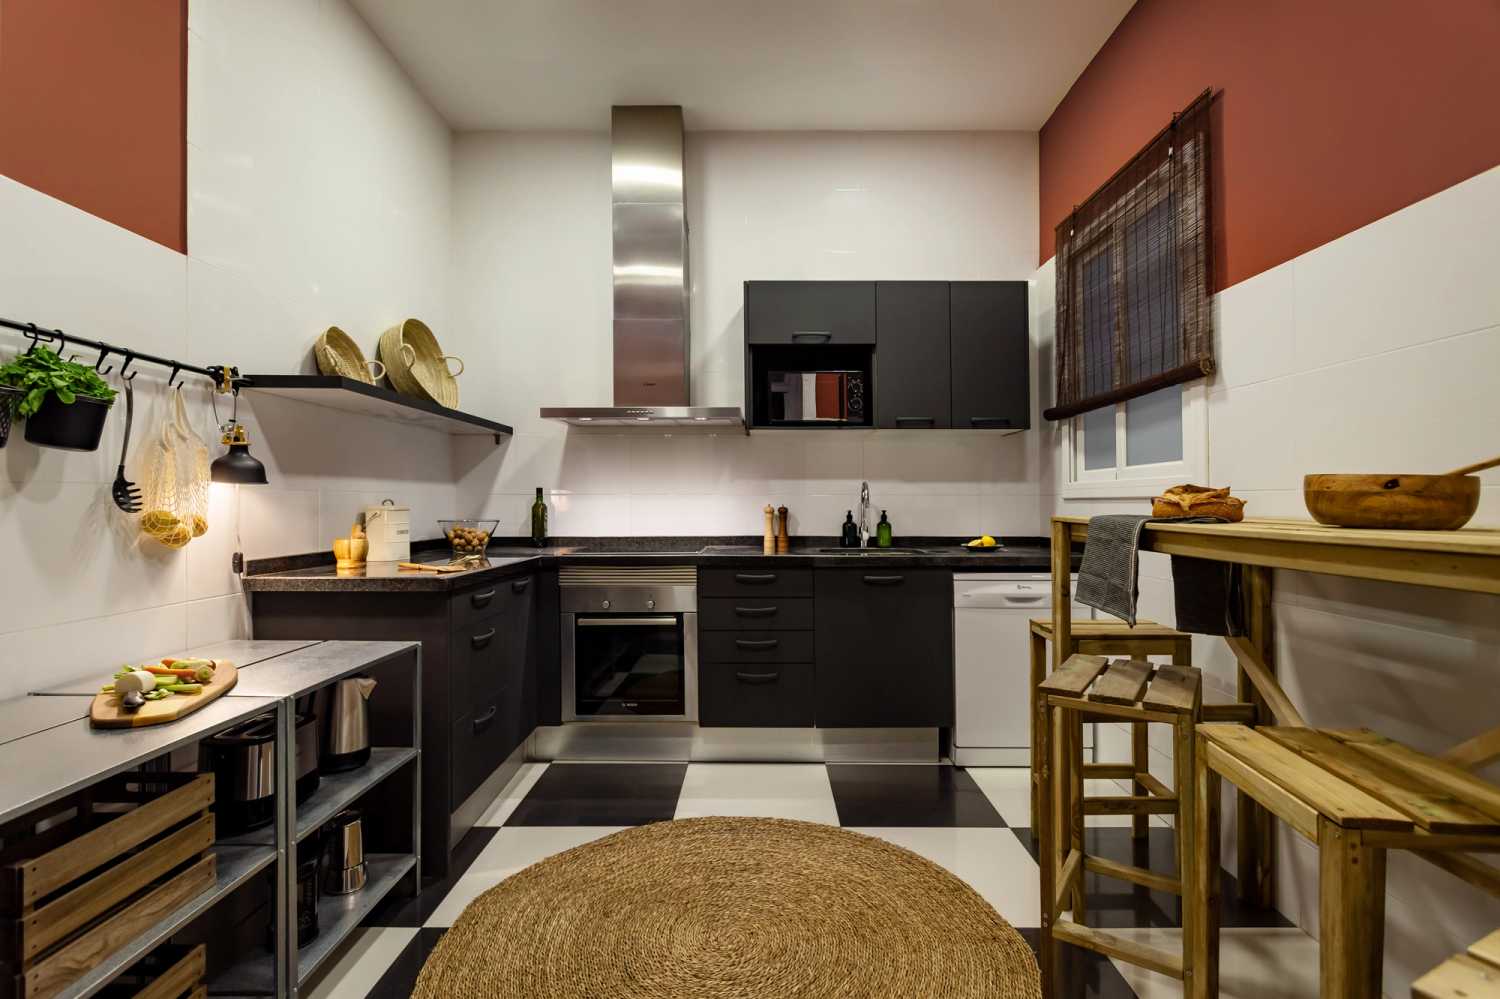 1654163162-apartment-fully-funished-kitchen-barcelona-318-l-21.jpg